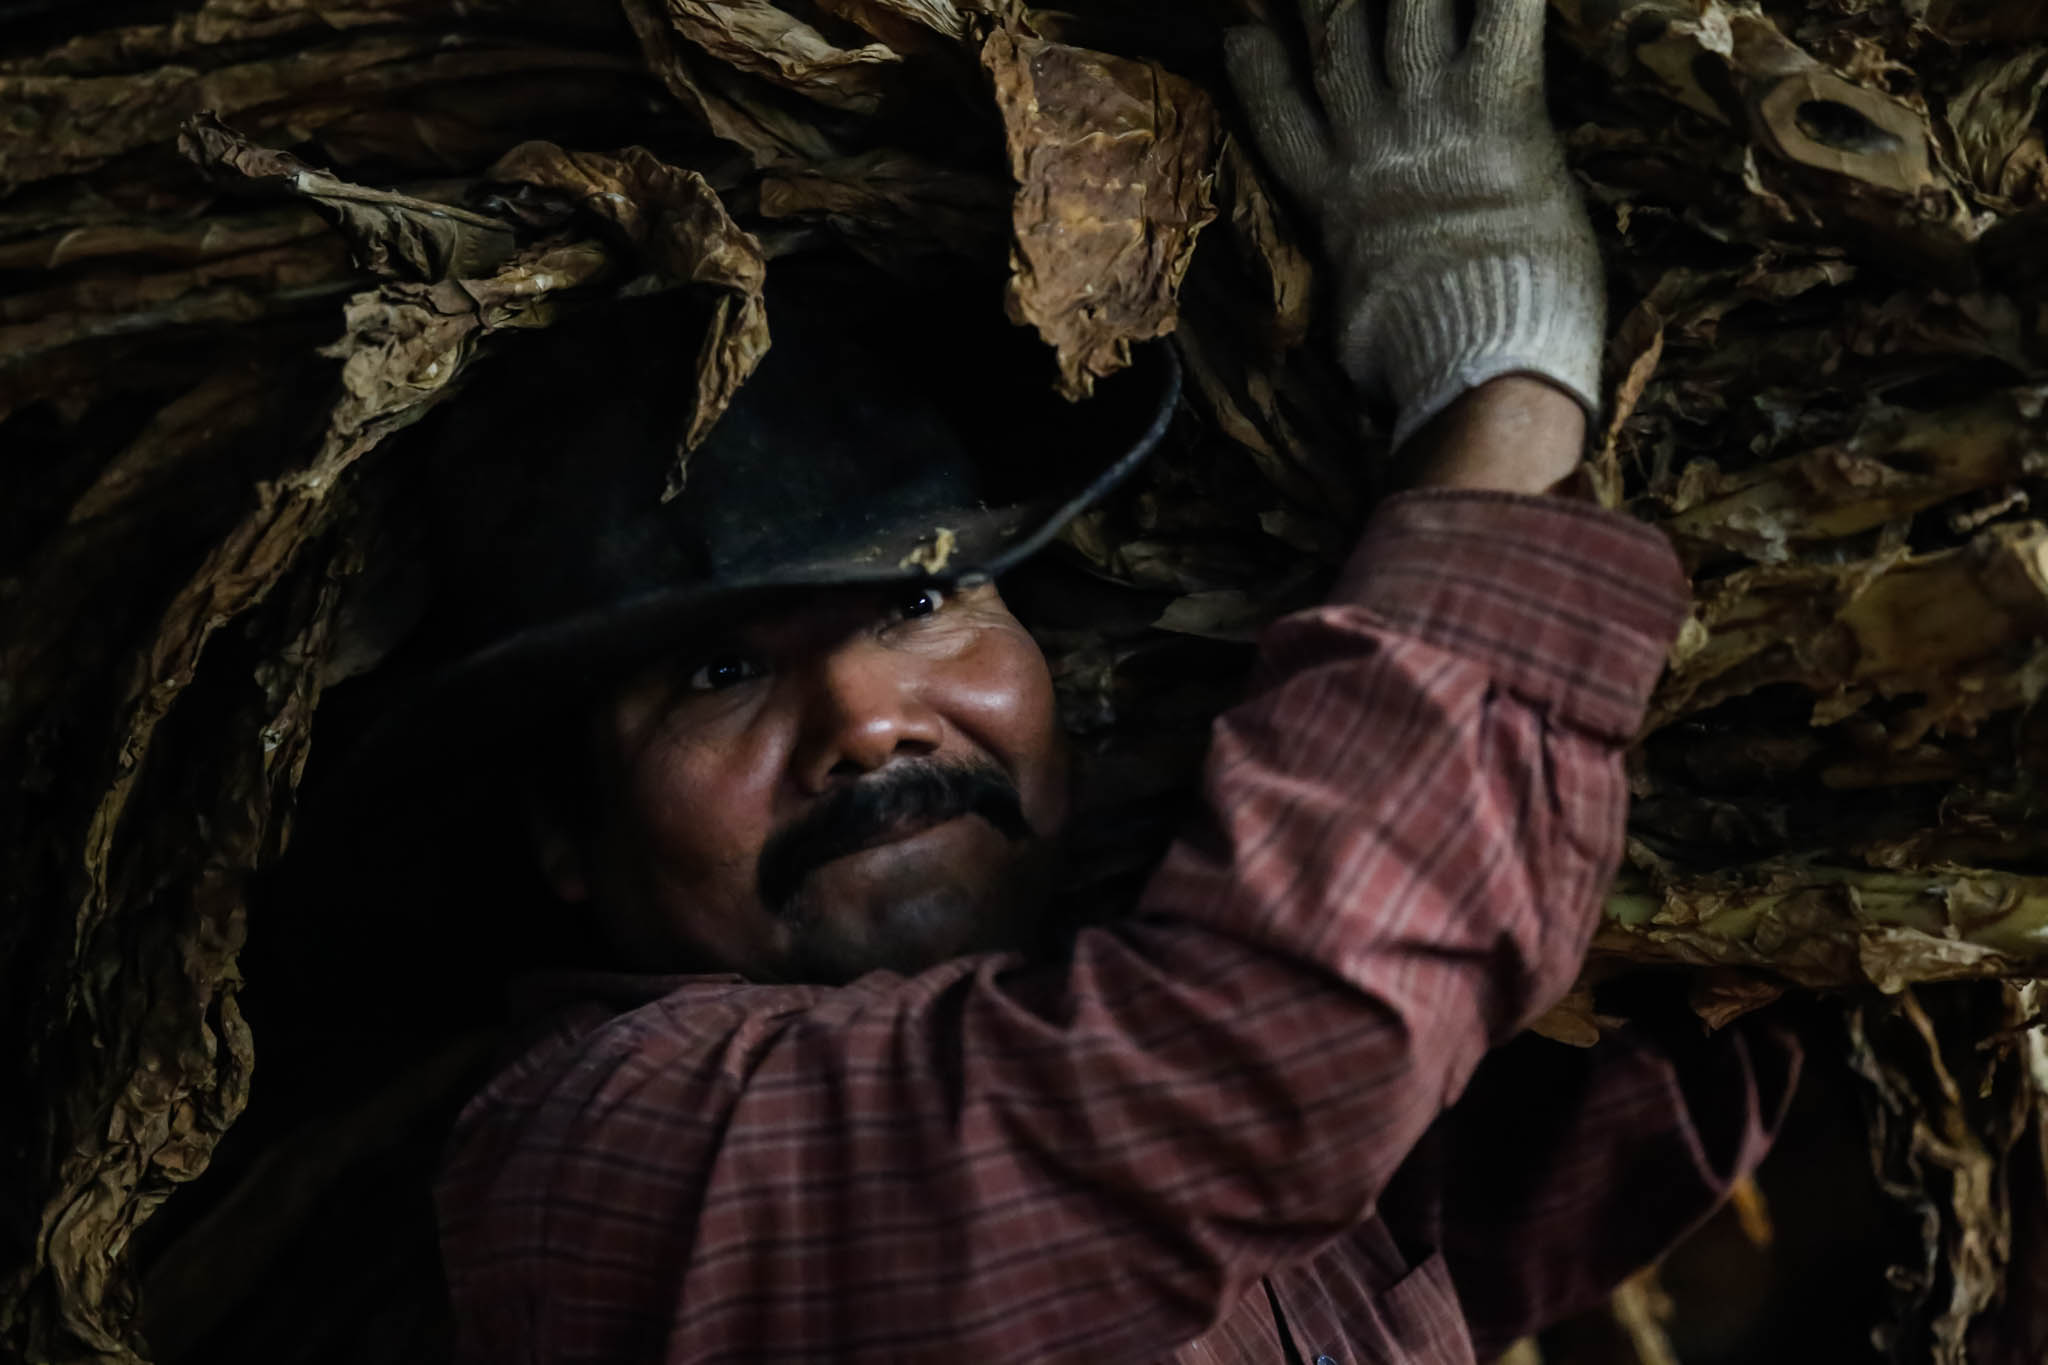  Benjamin Crúz Perez, a 42-year-old migrant worker from Mexico, carries stalks of tobacco to be processed at a barn in Midway, Kentucky. 